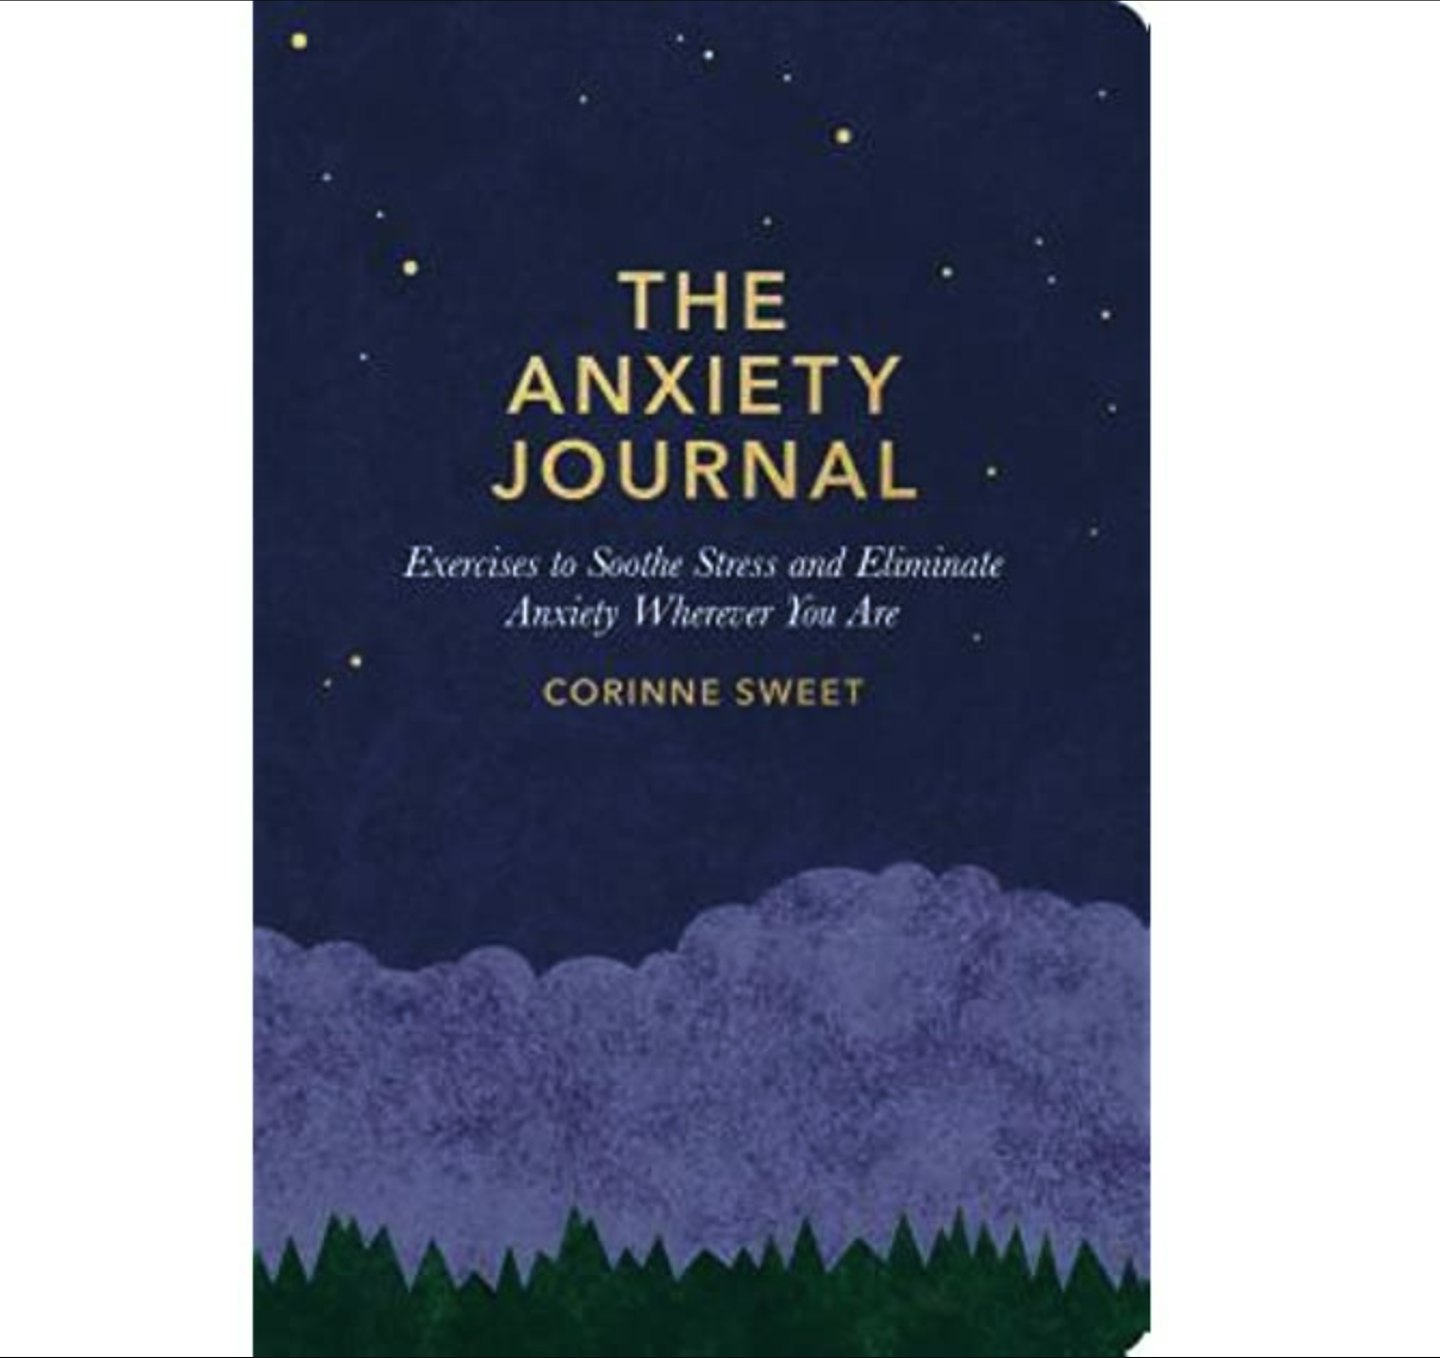 The Anxiety Journal: Exercises To Soothe Stress And Eliminate Anxiety Wherever You Are by Corinne Sweet